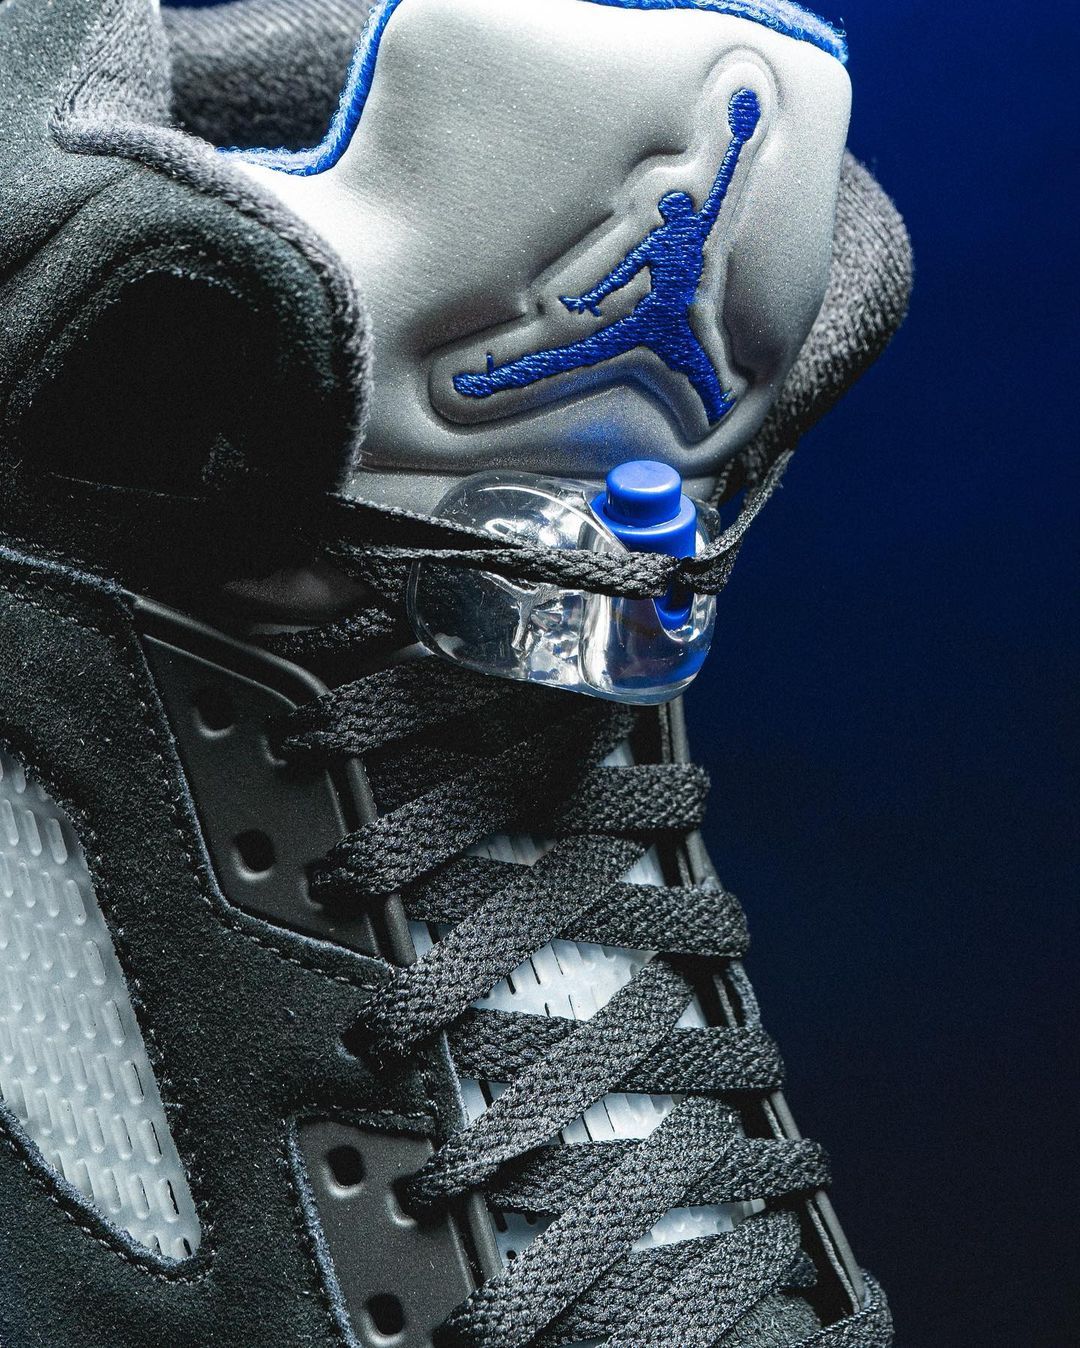 A pair of black and blue sneakers with a blue Jumpman logo - Air Jordan 5